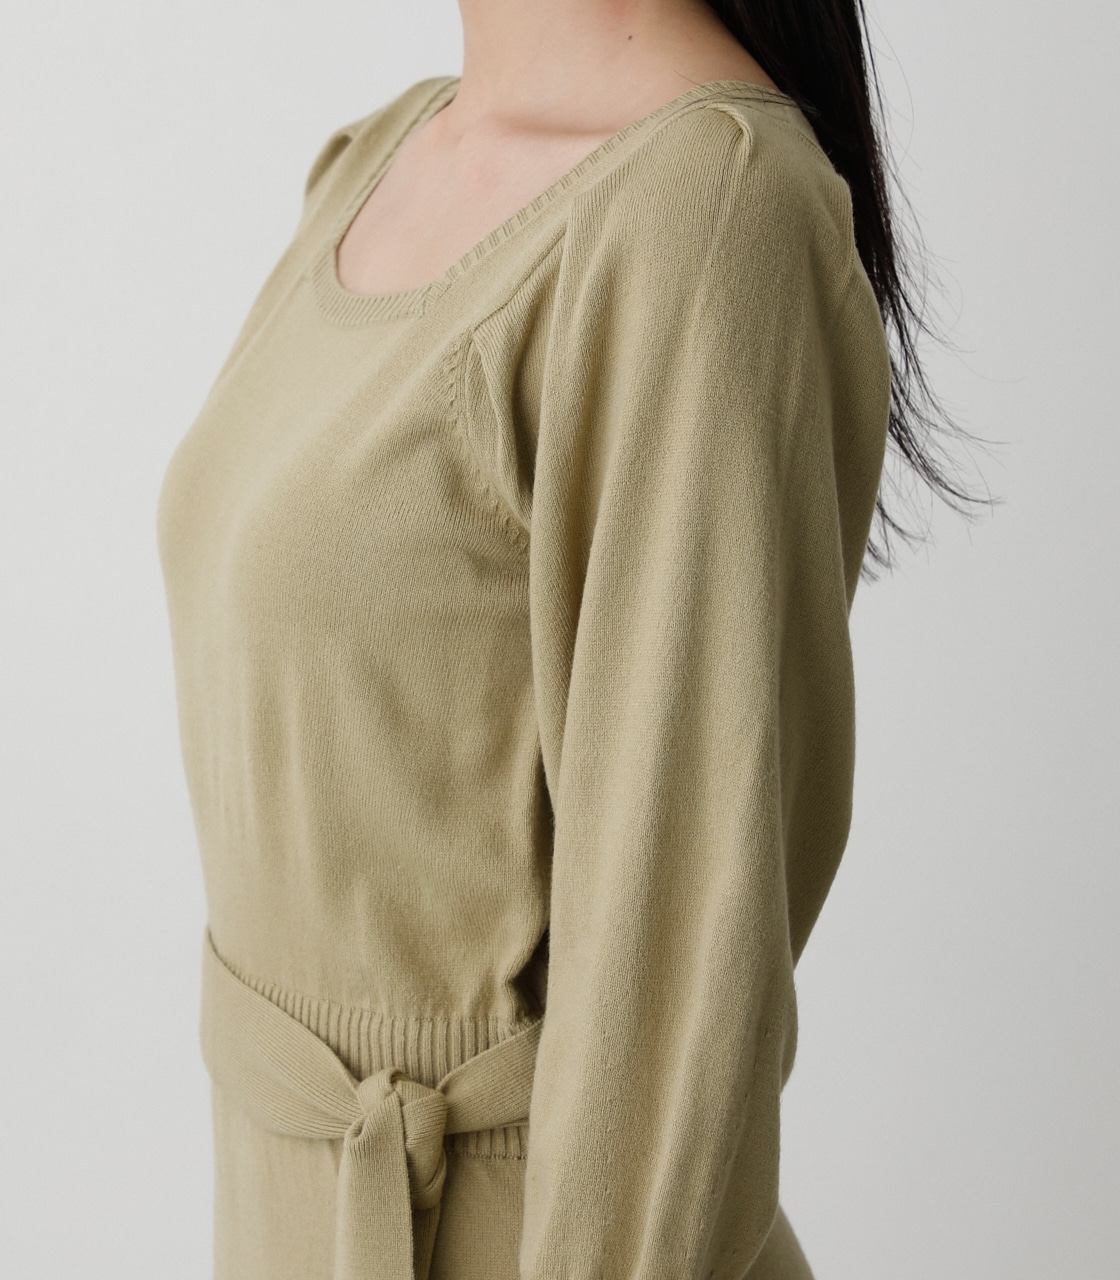 SQUARE NECK KNIT ONEPIECE/スクエアネックニットワンピース 詳細画像 L/GRN 9